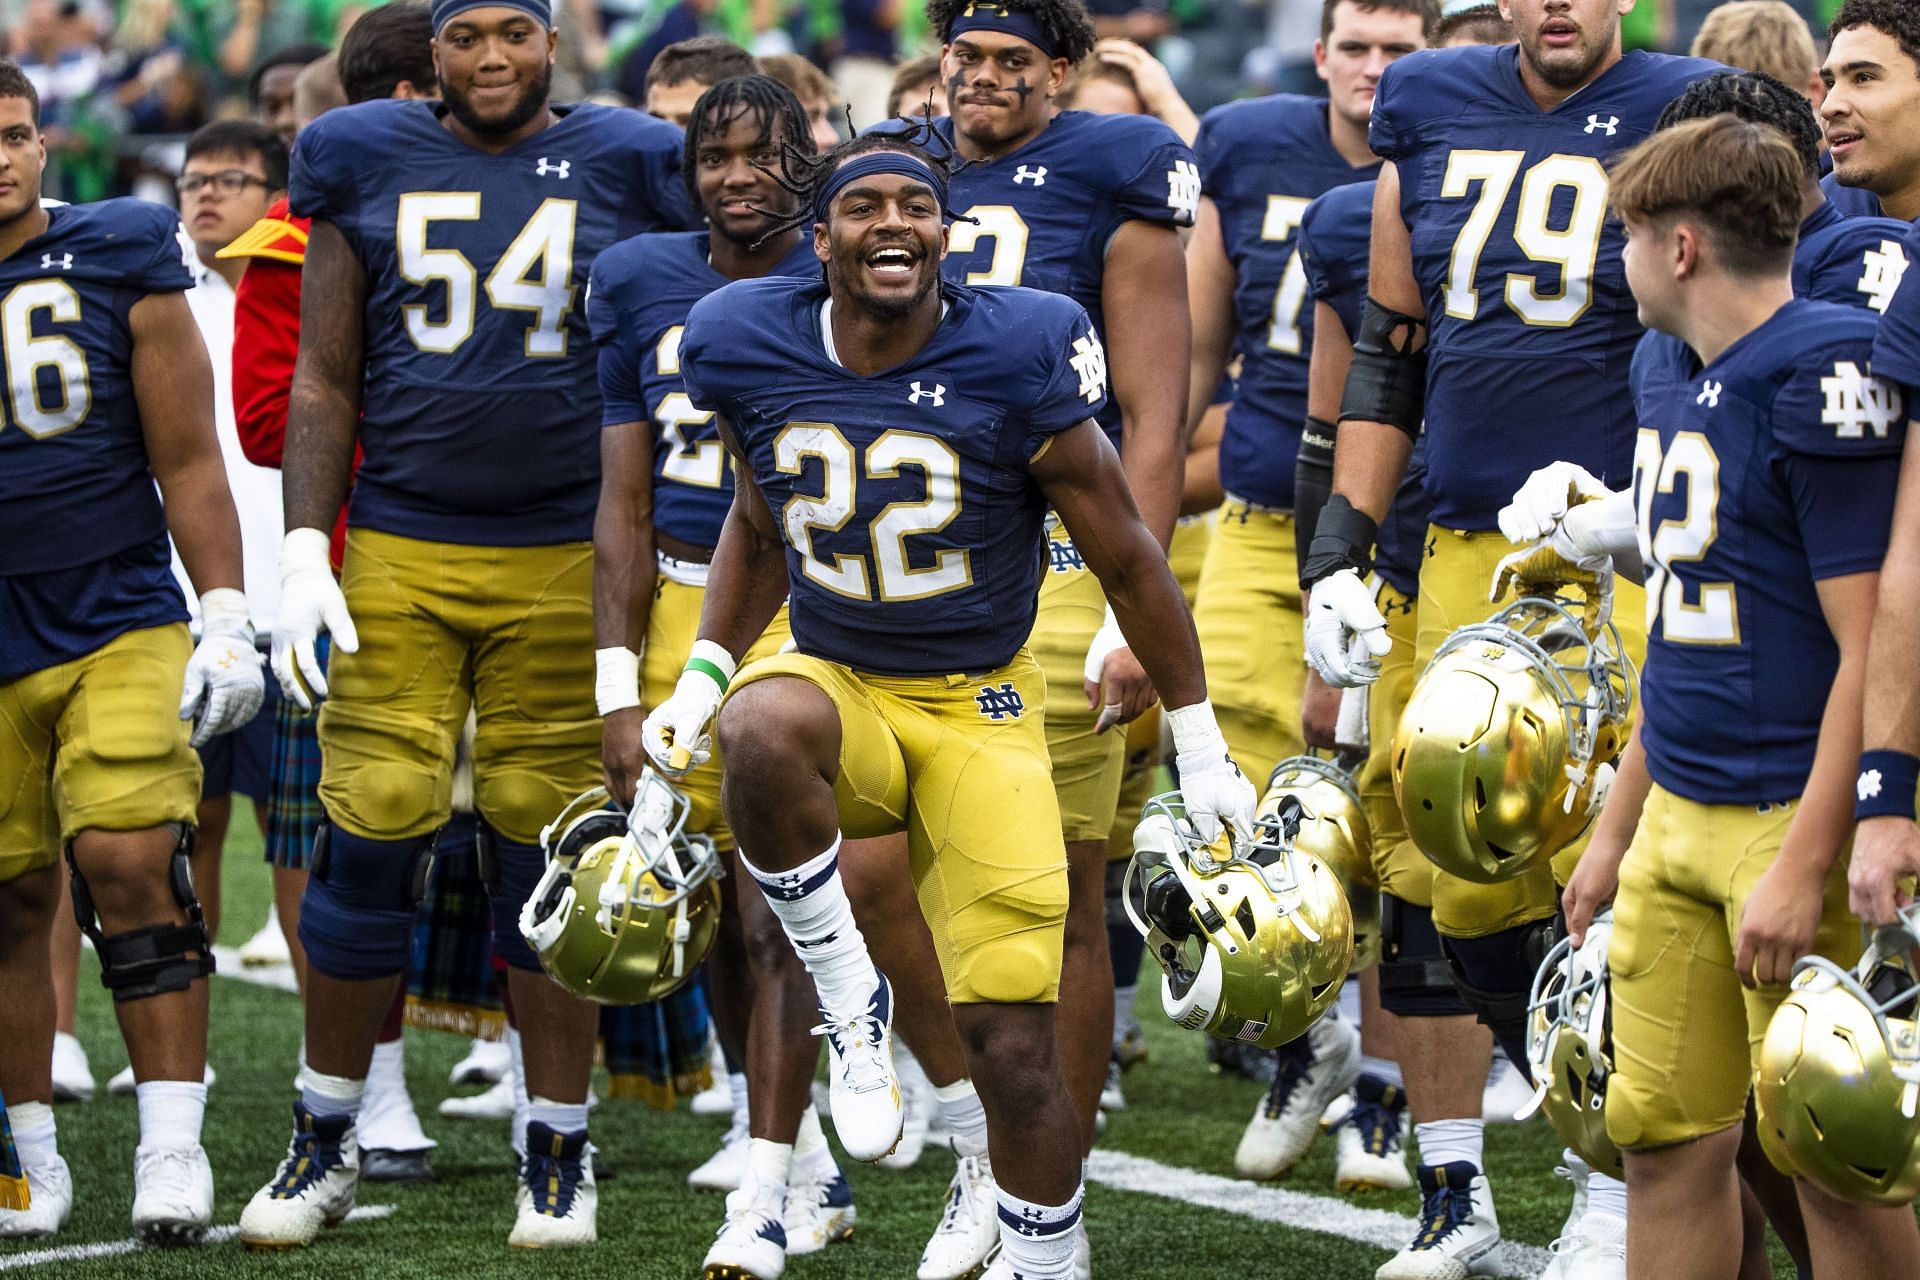 Ohio State vs. Notre Dame ticket prices soar as the cheapest ticket for